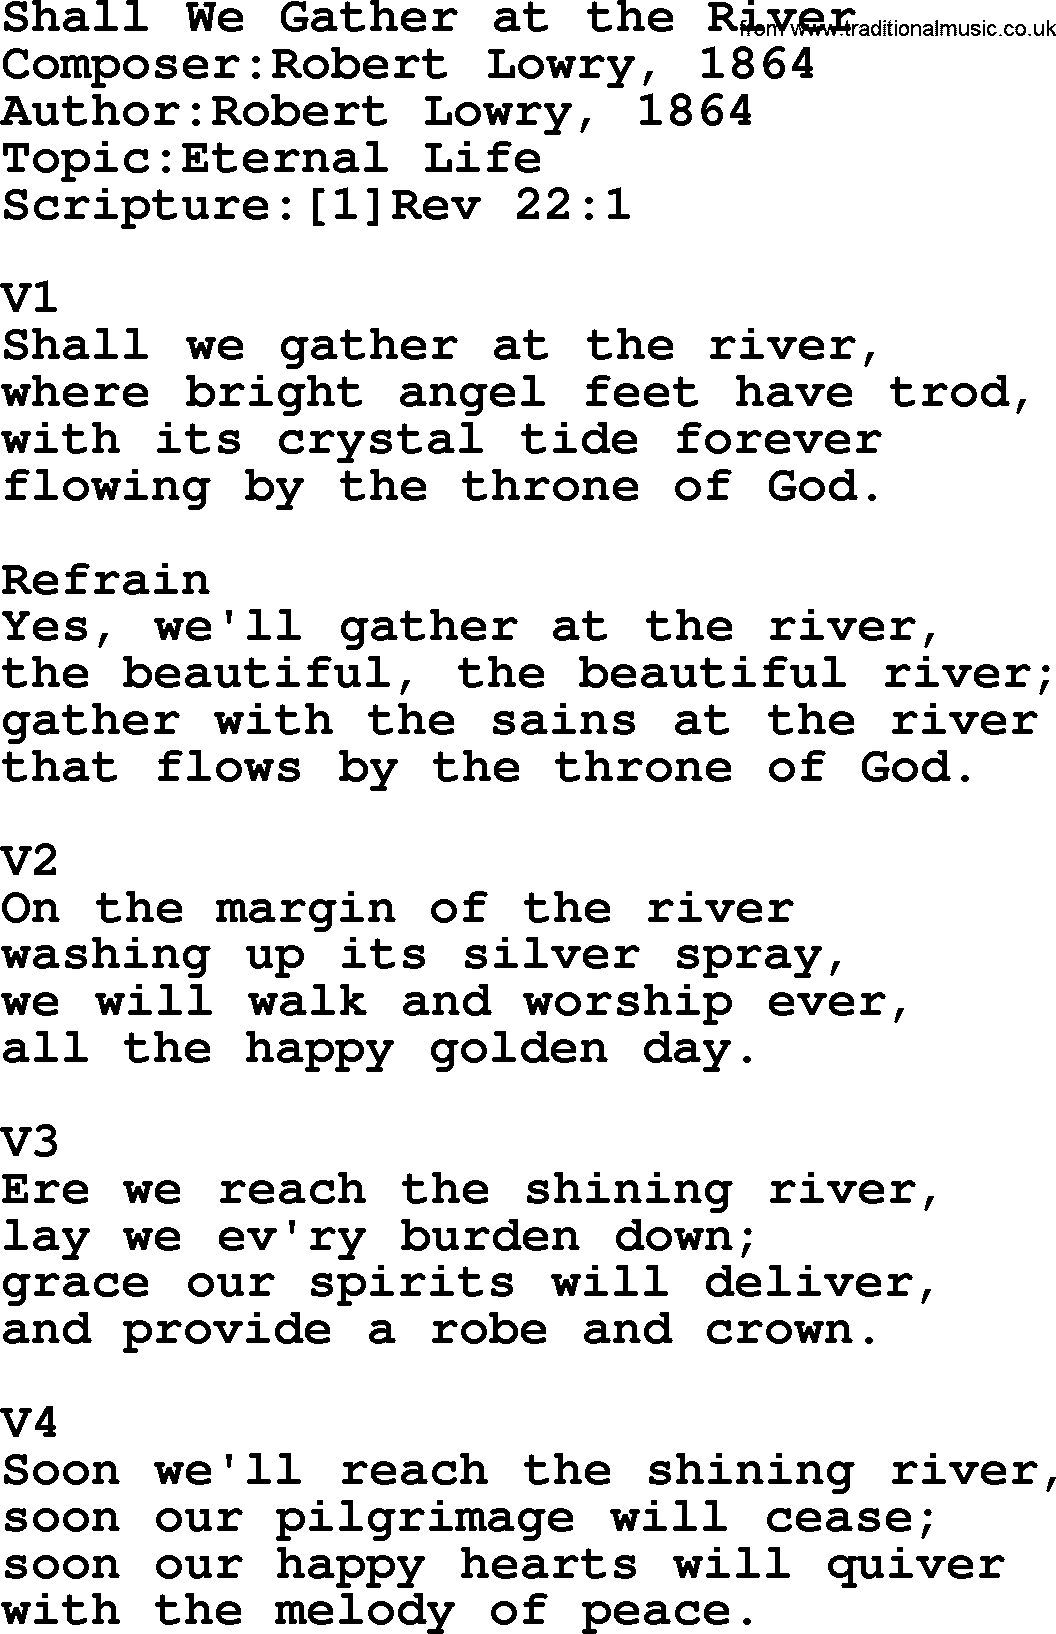 Adventist Hynms collection, Hymn: Shall We Gather At The River, lyrics with PDF